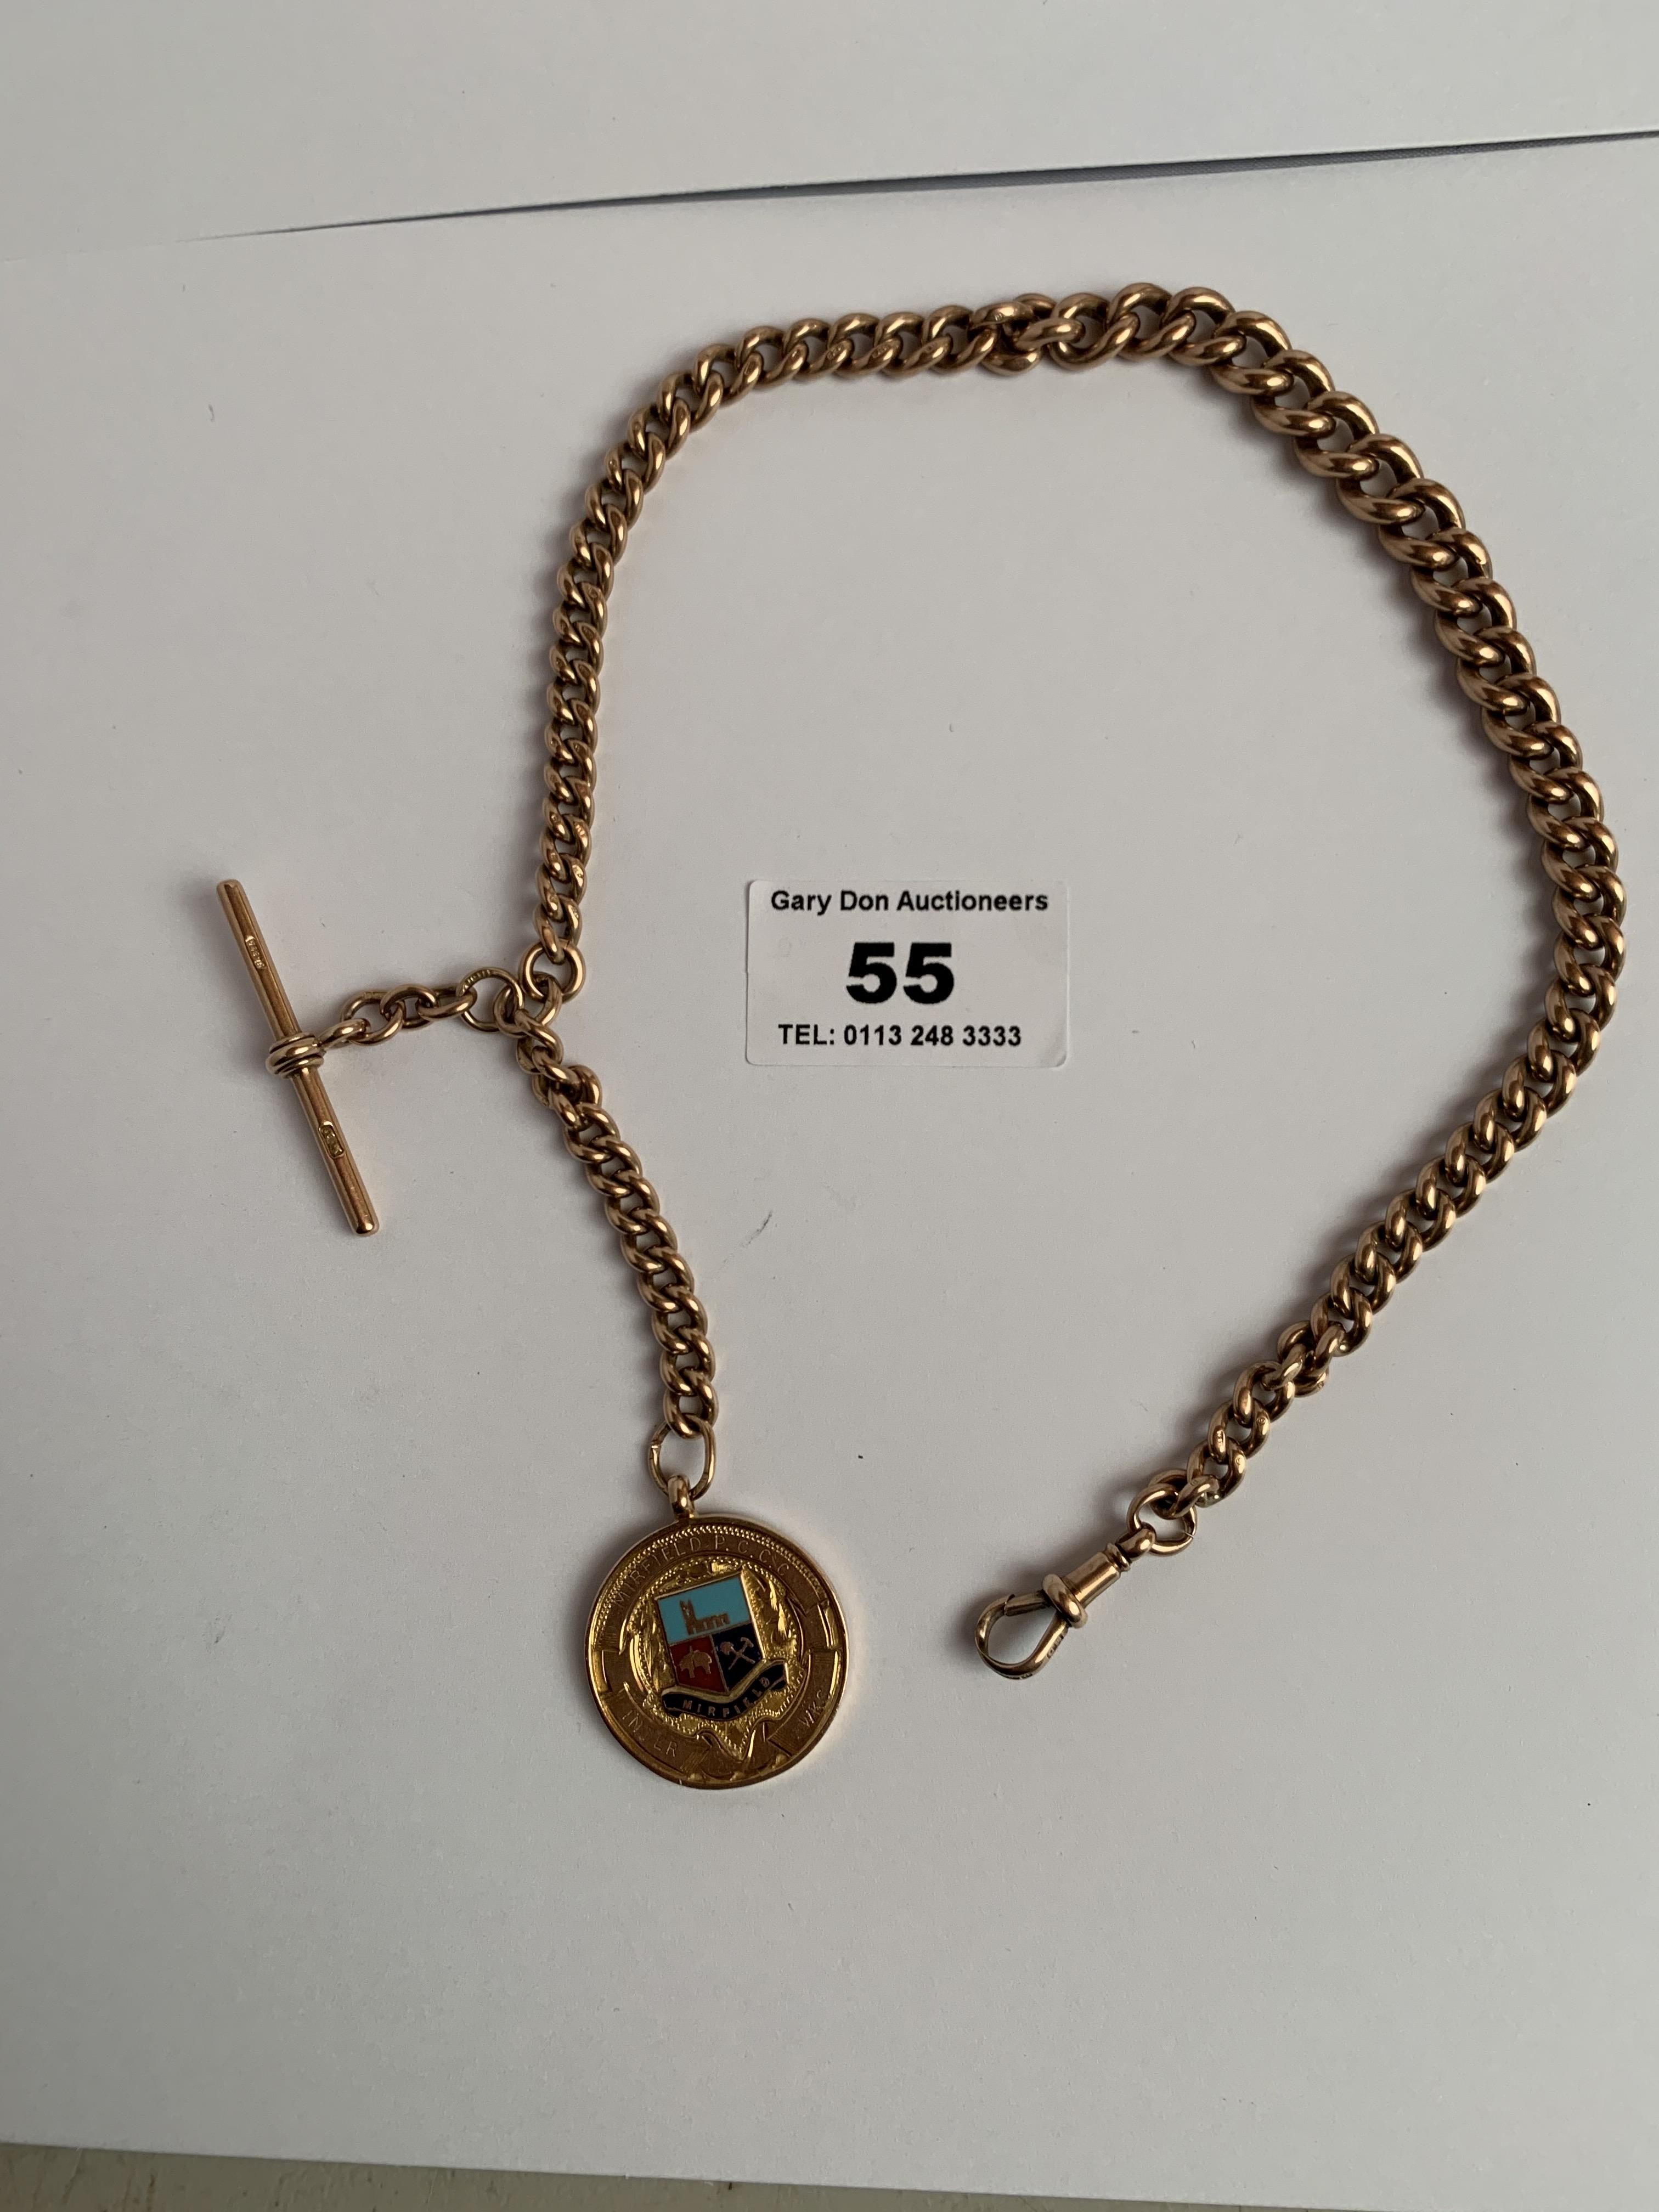 9k gold watch chain with t-bar and medallion- Mirfield P.C.C.C, Inter WKS, 1926, w:60.72 grams,